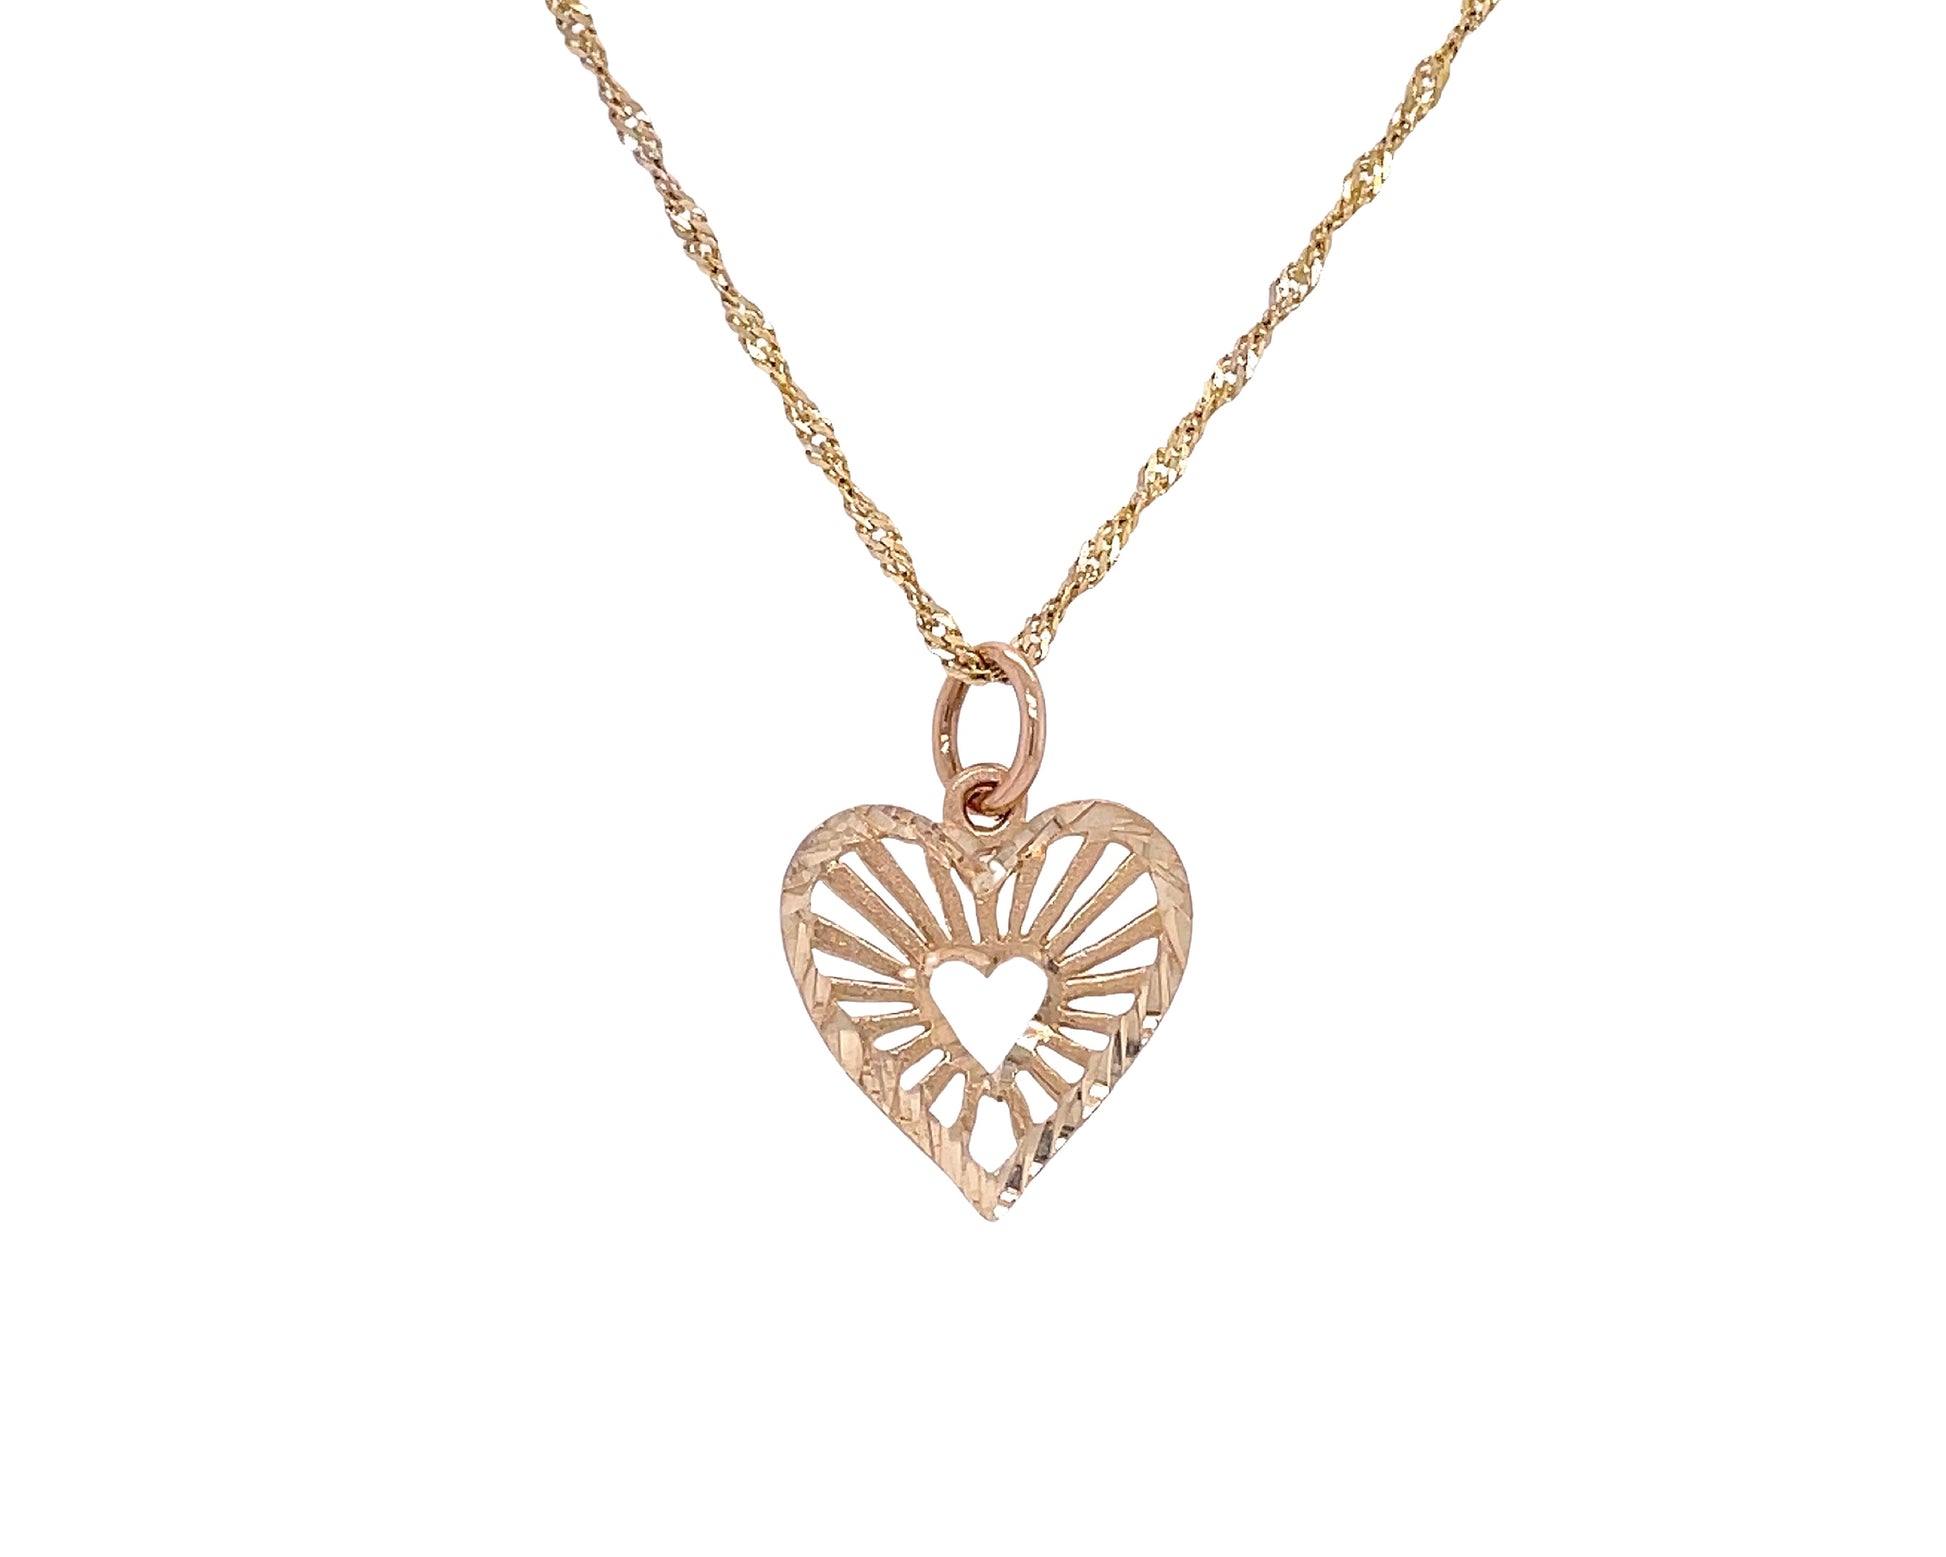 10k yellow gold Singapore chain with heart charm- women's jewelry 